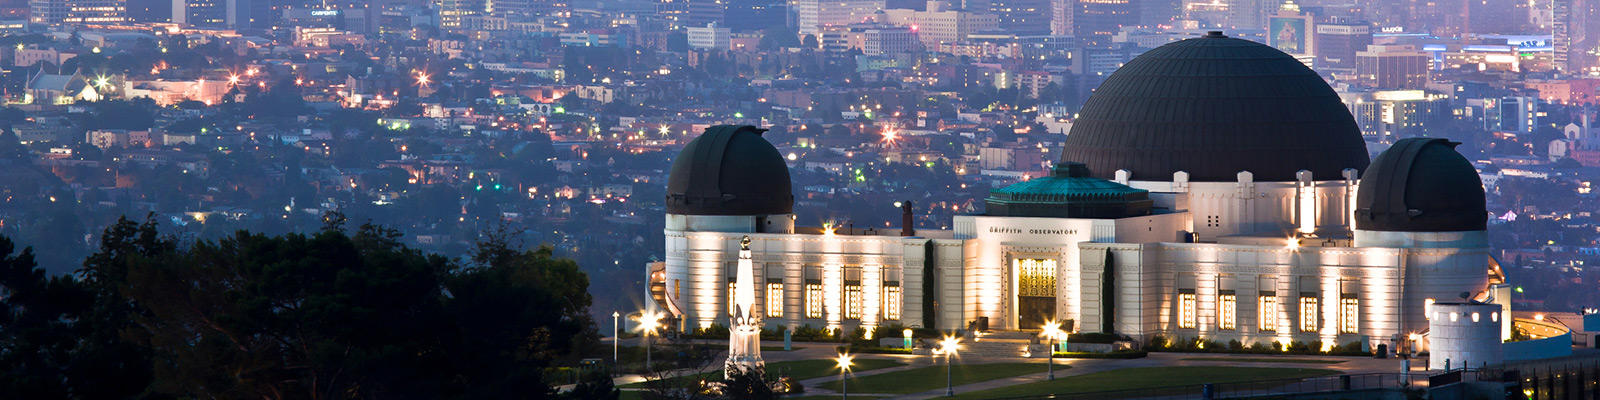 griffith observatory in LA against the skyline at sunset